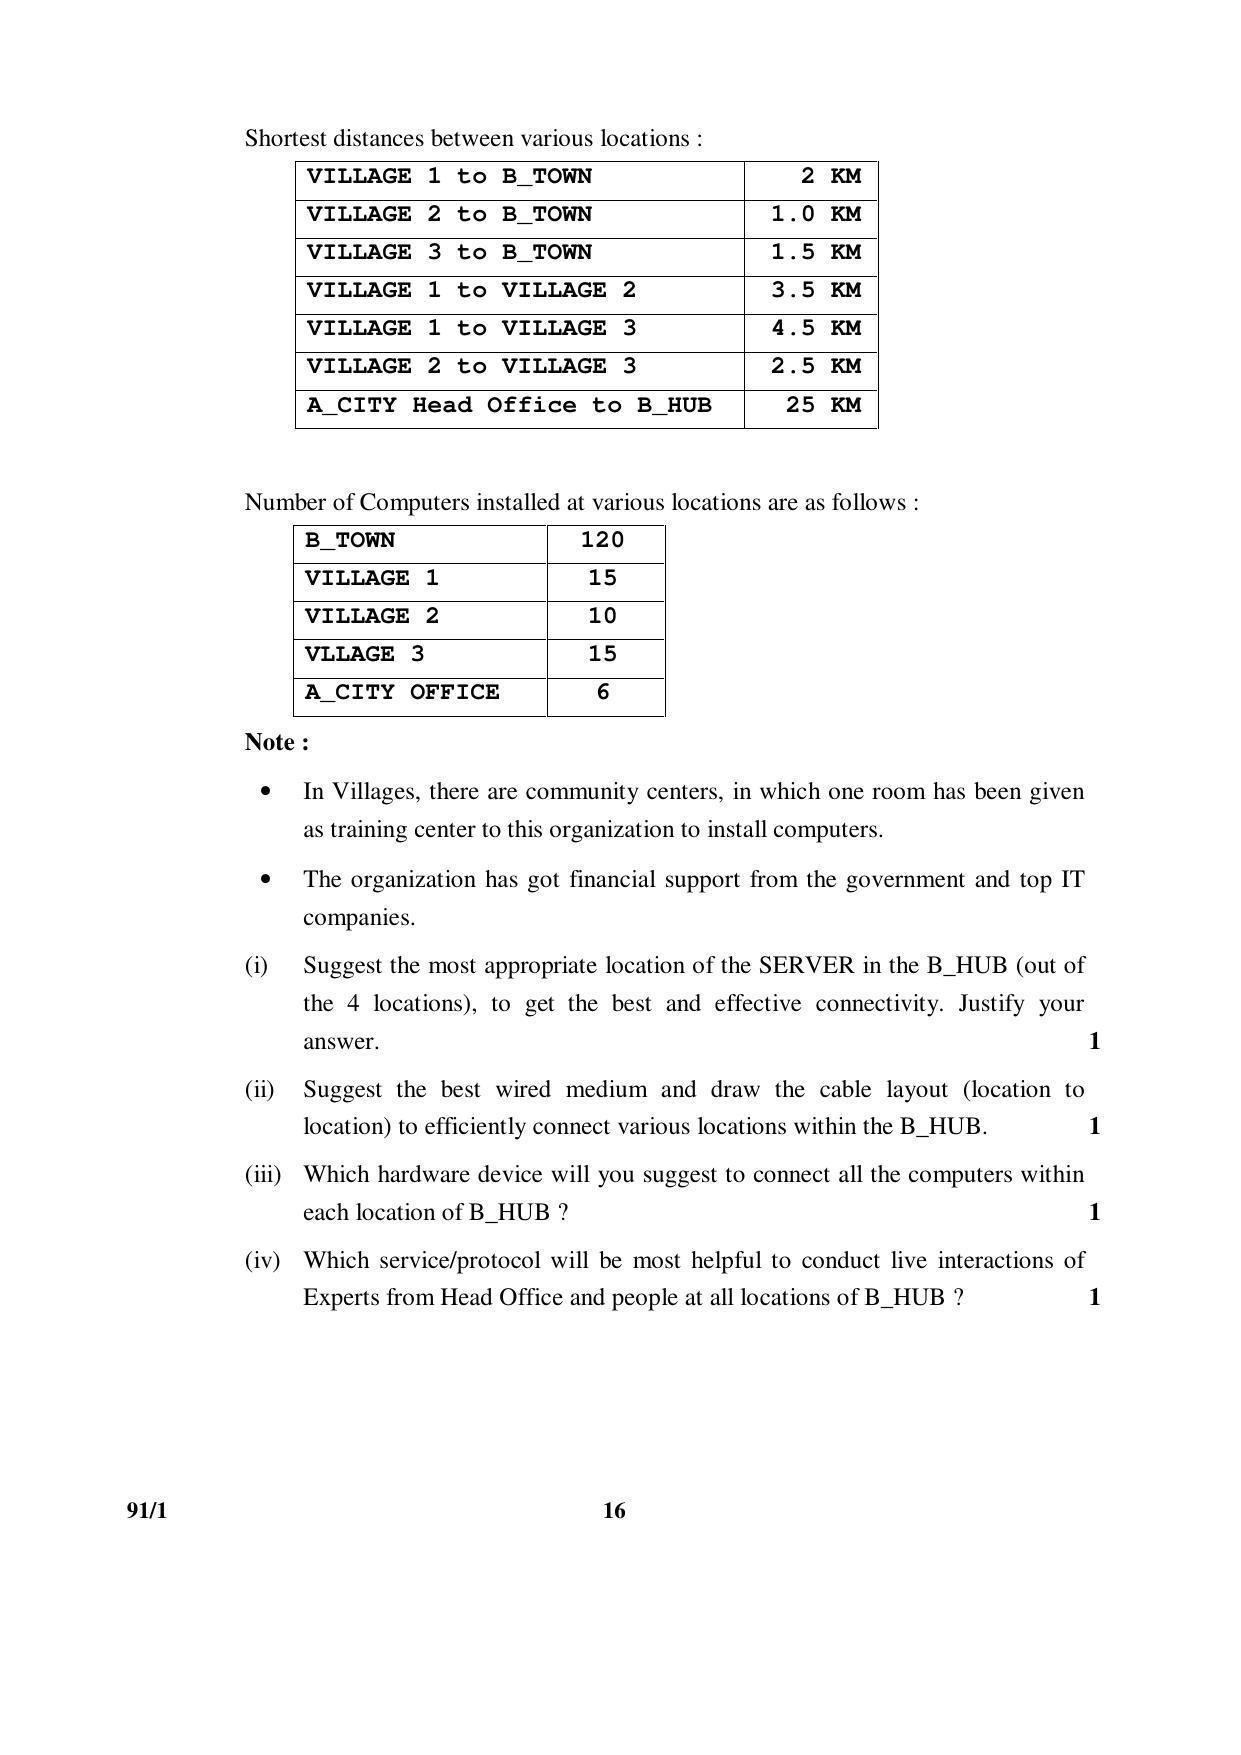 CBSE Class 12 91-1 COMPUTER SCIENCE 2016 Question Paper - Page 16